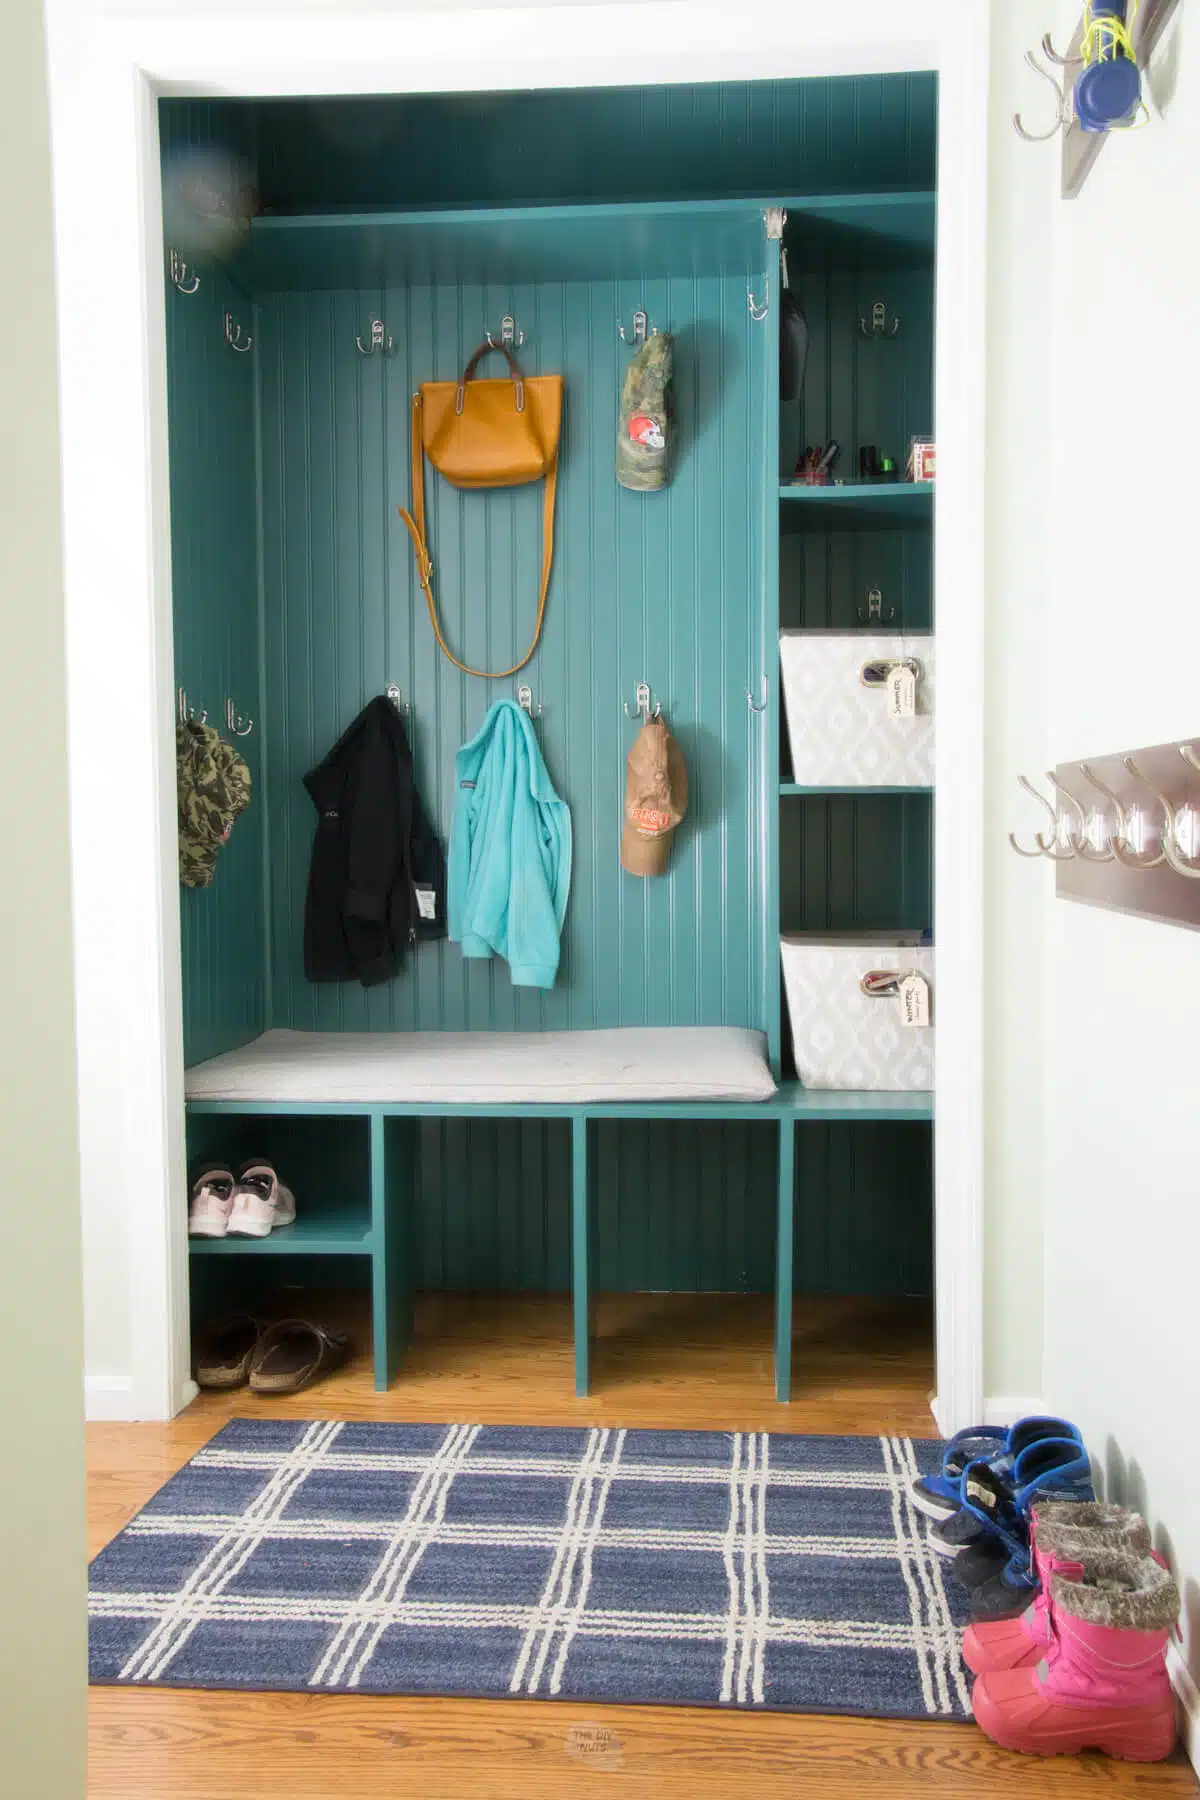 Sherwin Williams Rookwood Sash Green painted in mudroom closet with blue rug and items hanging.